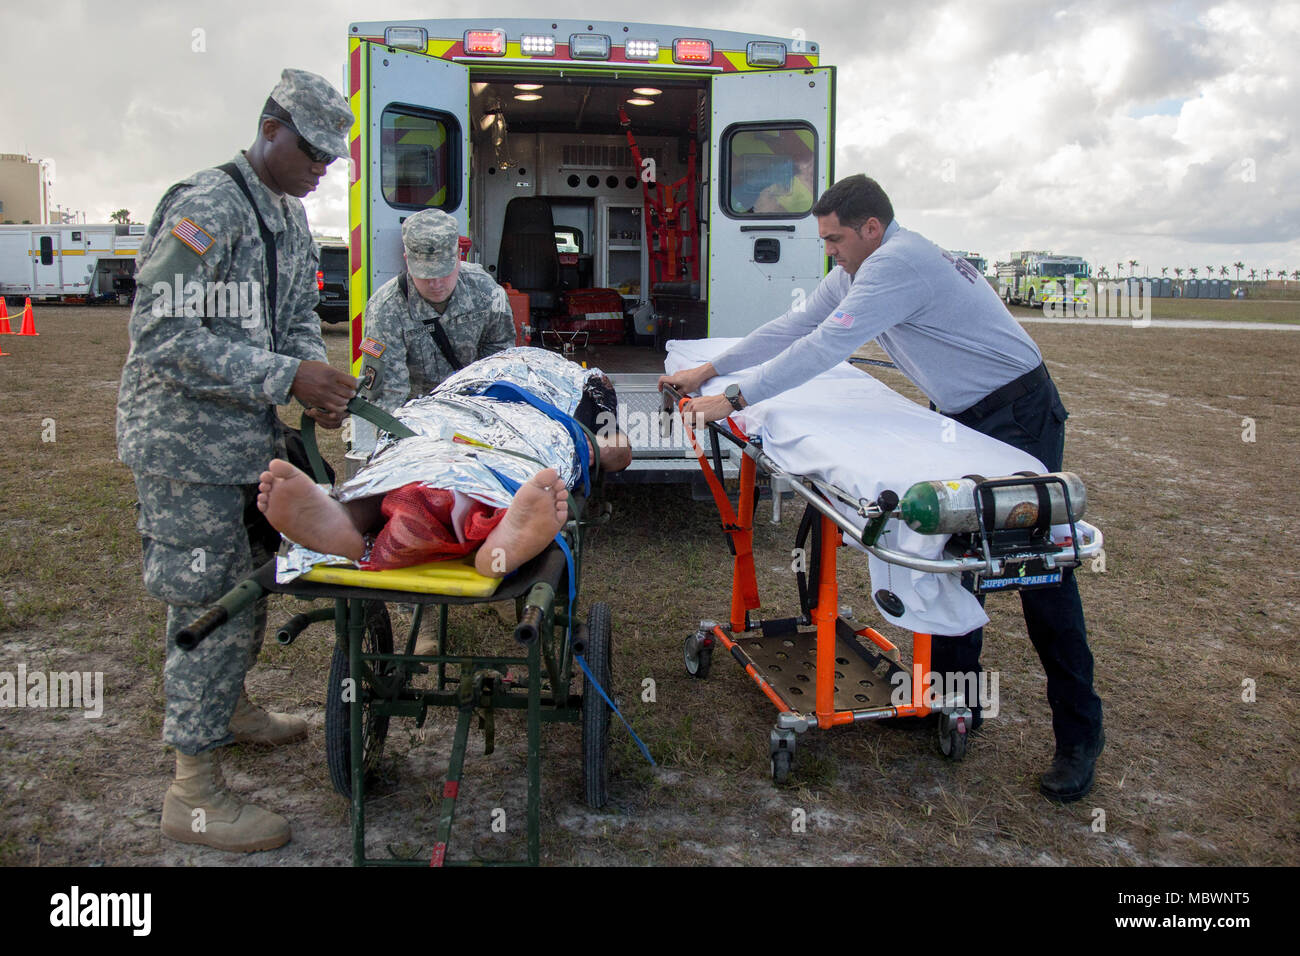 U.S. Army reserve soldiers and Miami-Dade Fire Department Hazmat member, secures a casualty to a gurny for a simulated mass chemical attack during a Joint Training Exercise hosted by the Miami-Dade Fire Department and Homestead-Miami Speedway in Miami, Fla. Jan. 11, 2018. This JTE focused on building response capabilities and seamless the transition between the local first responders and the follow-on support provided by the National Guard and Active duty soldiers. (U. S. Army Photo by Spc. P.J. Siquig) Stock Photo